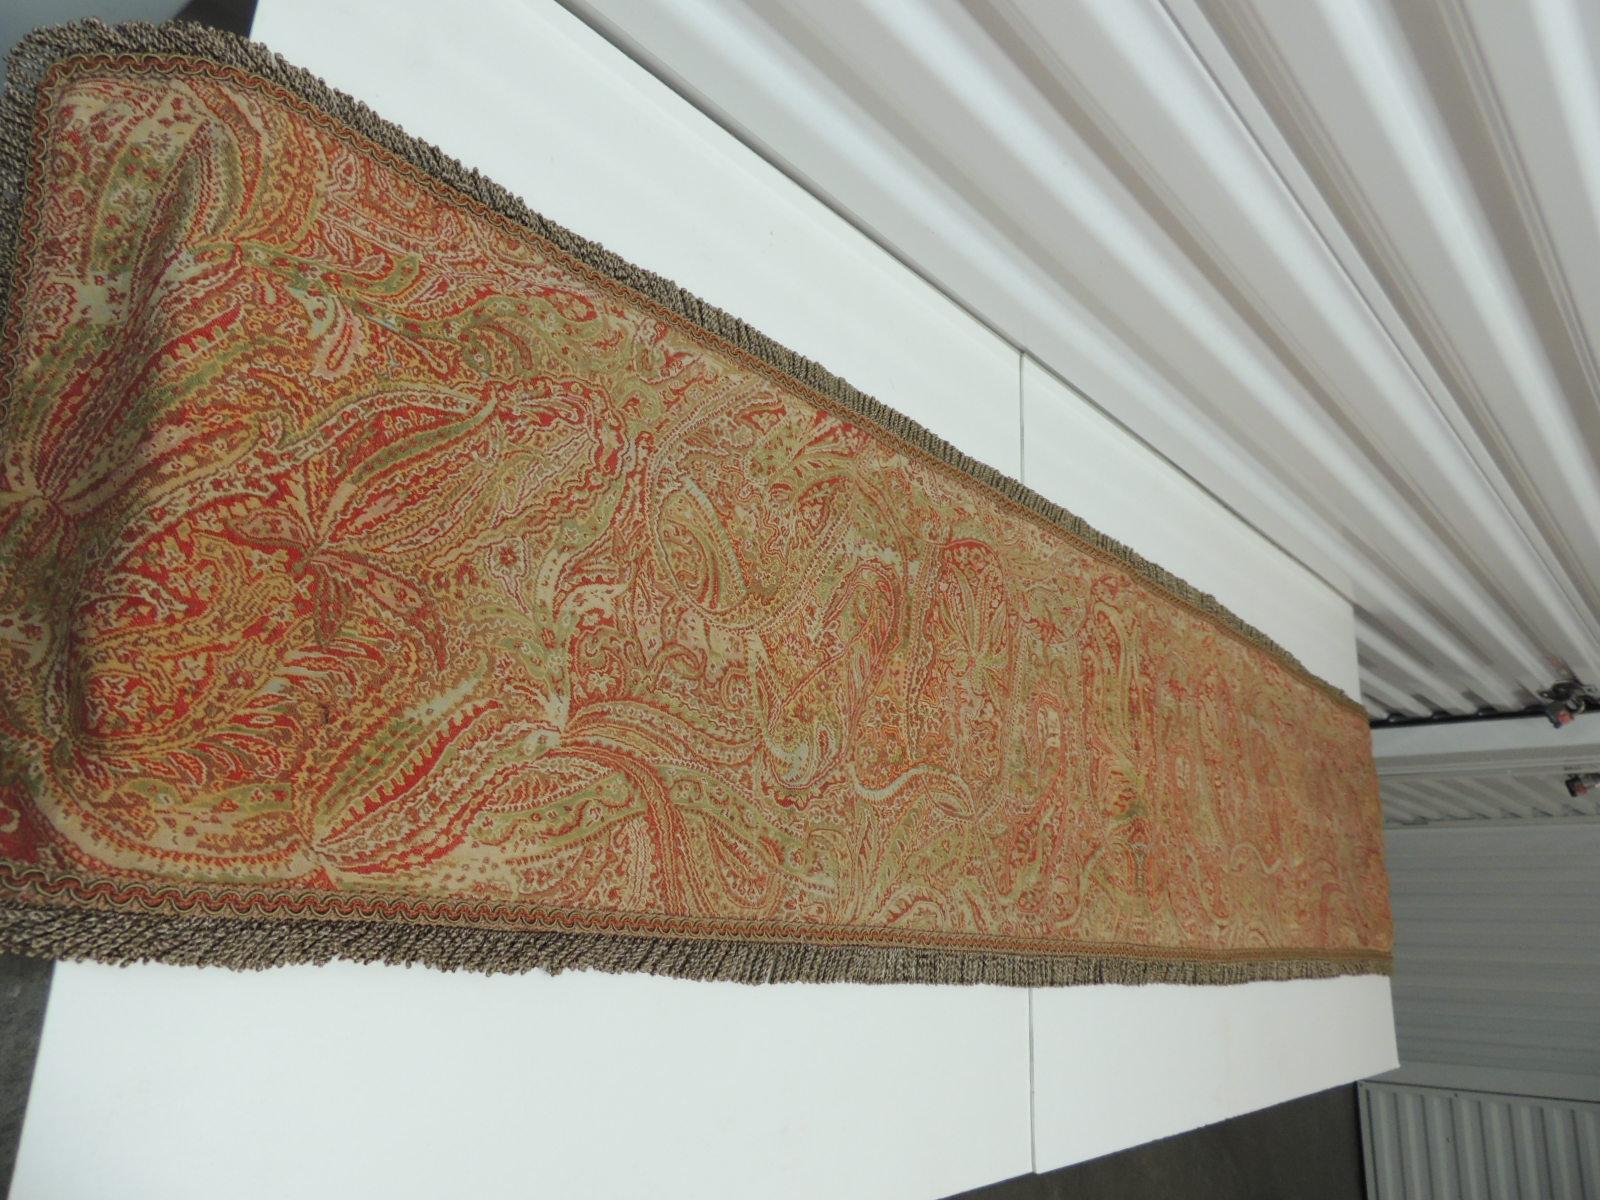 Indian Kashmir Paisley Red and Orange Table Runner